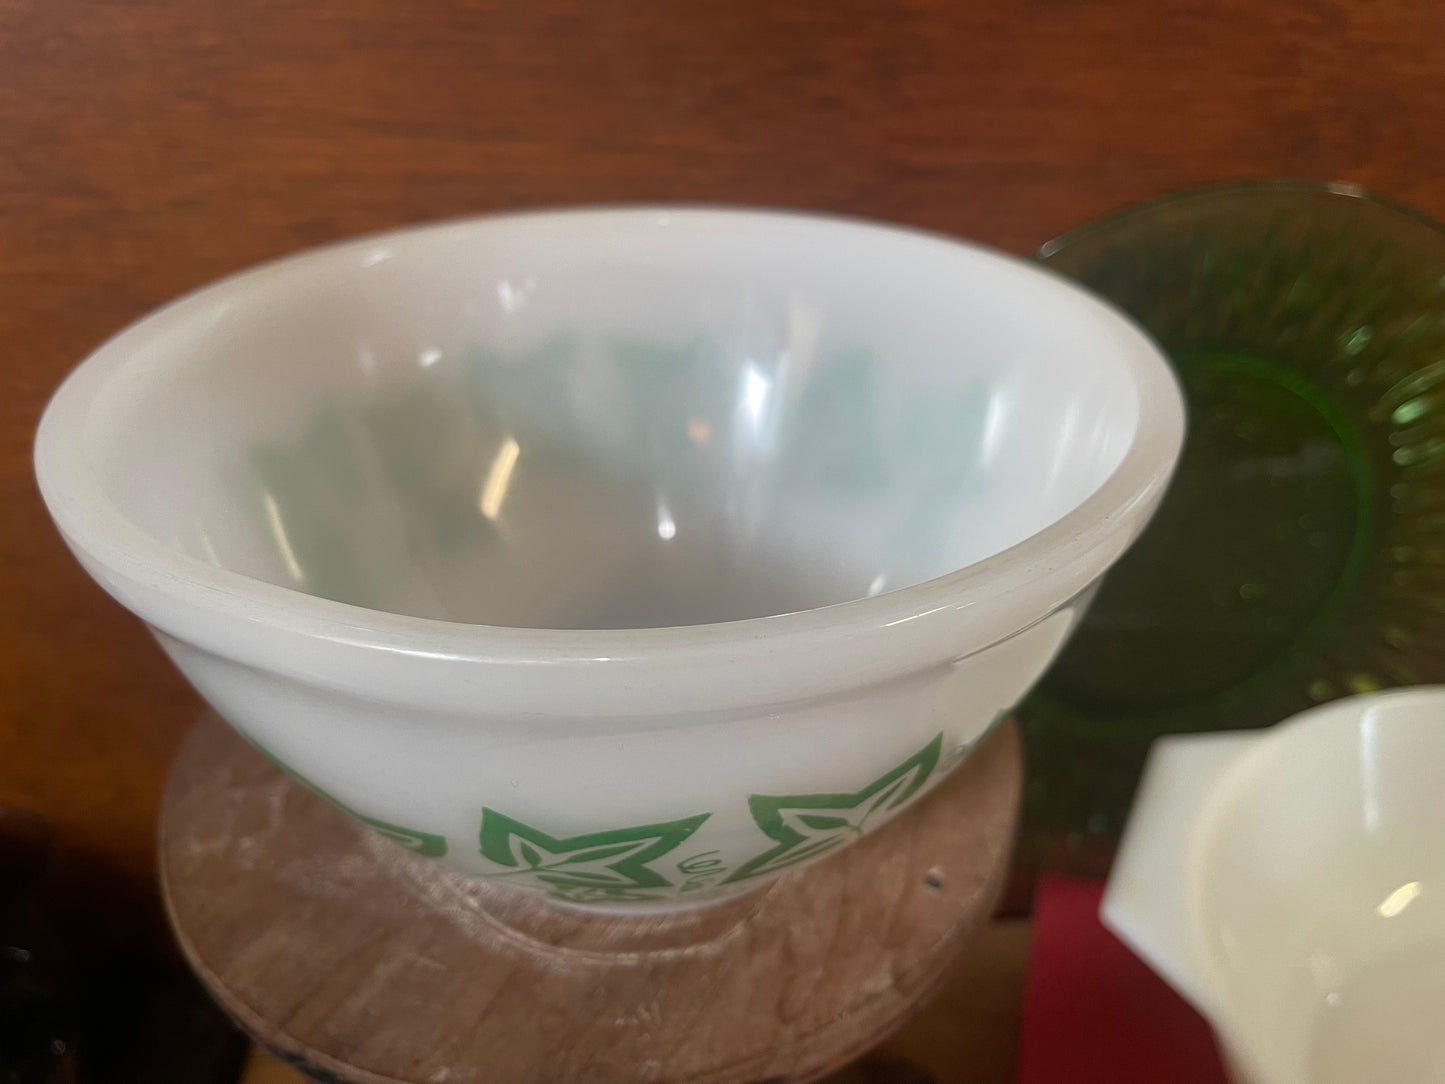 White Pyrex bowl with green grape leaf design 1960s